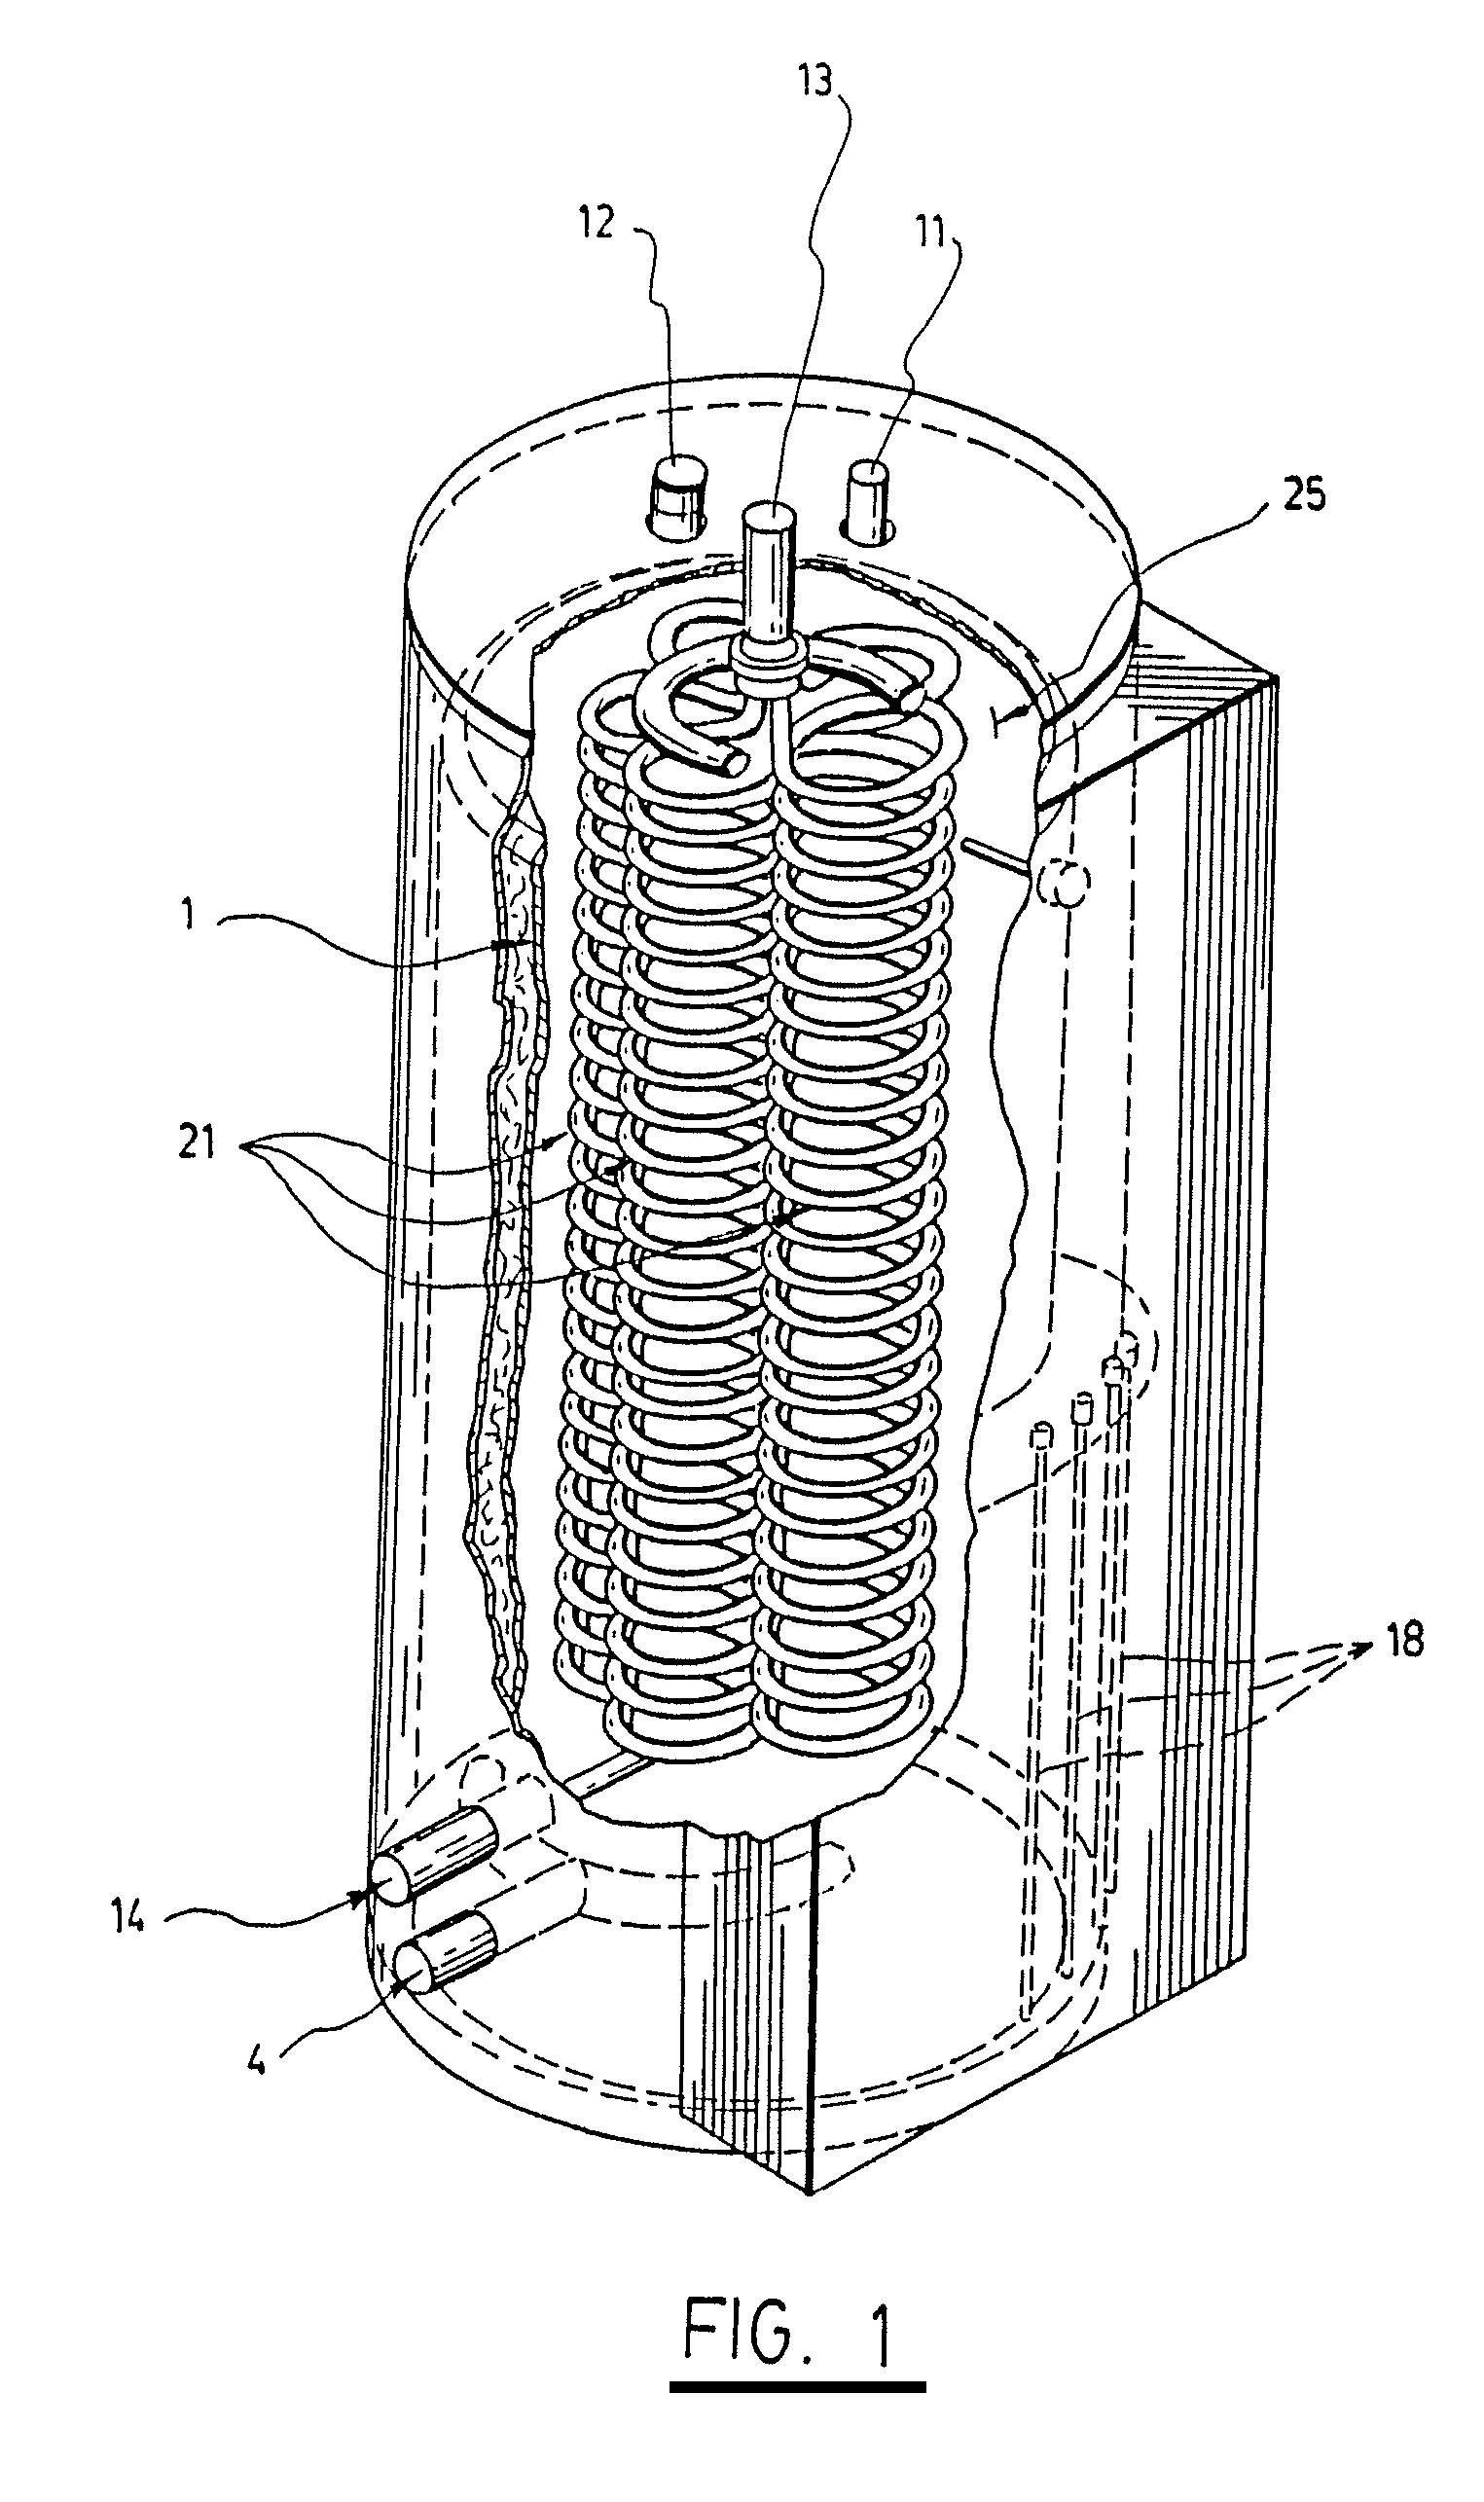 Boiler with an adjacent chamber and an helicoidal heat exchanger